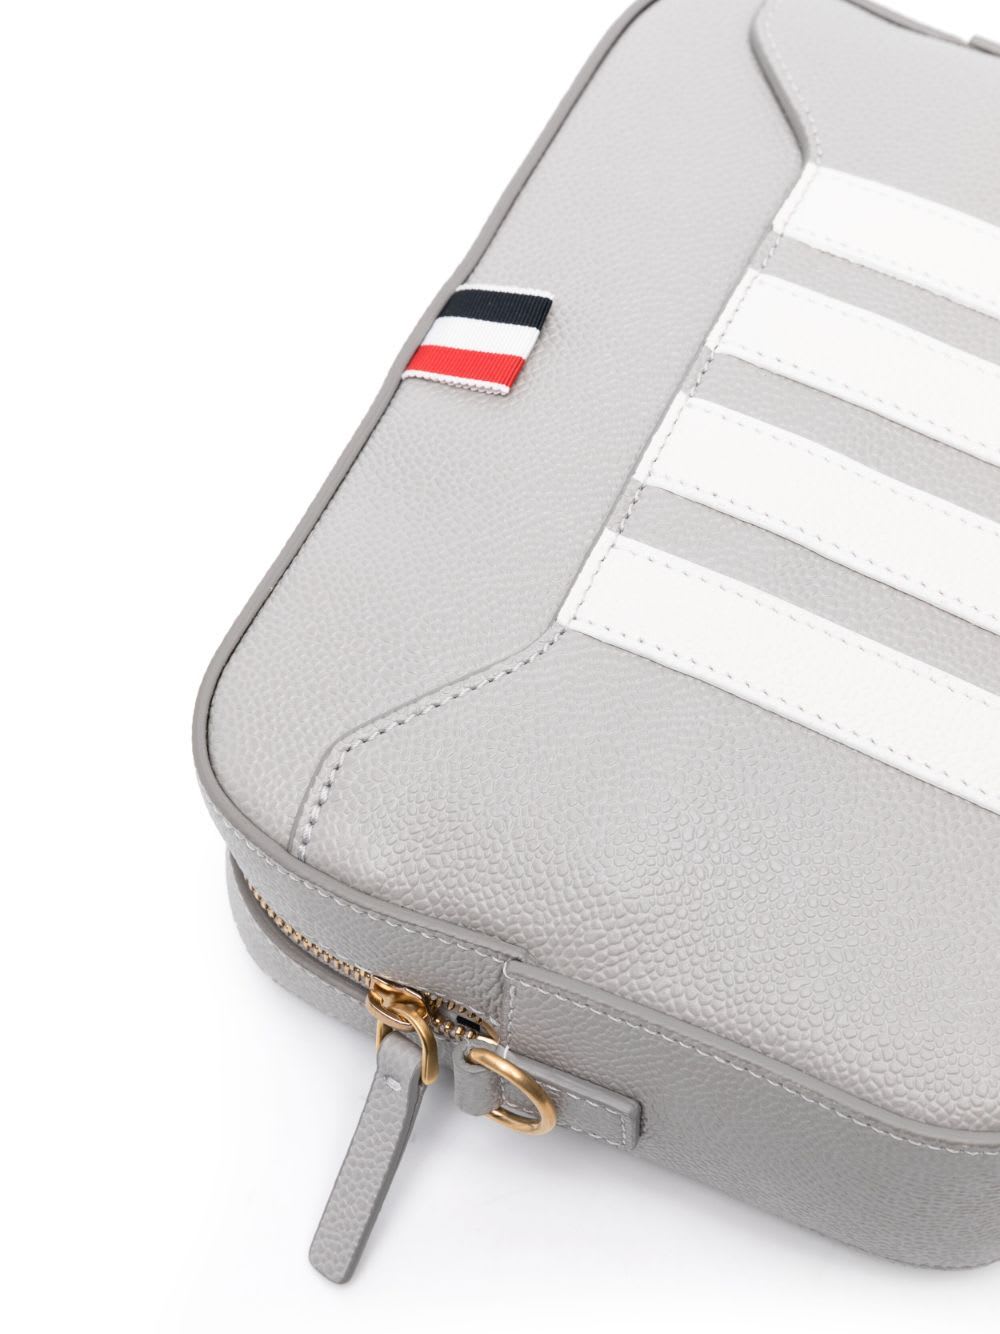 Shop Thom Browne Small Camera Bag With Rwb Strap & 4 Bar Stripes In Pebble Grain Leather In Lt Grey